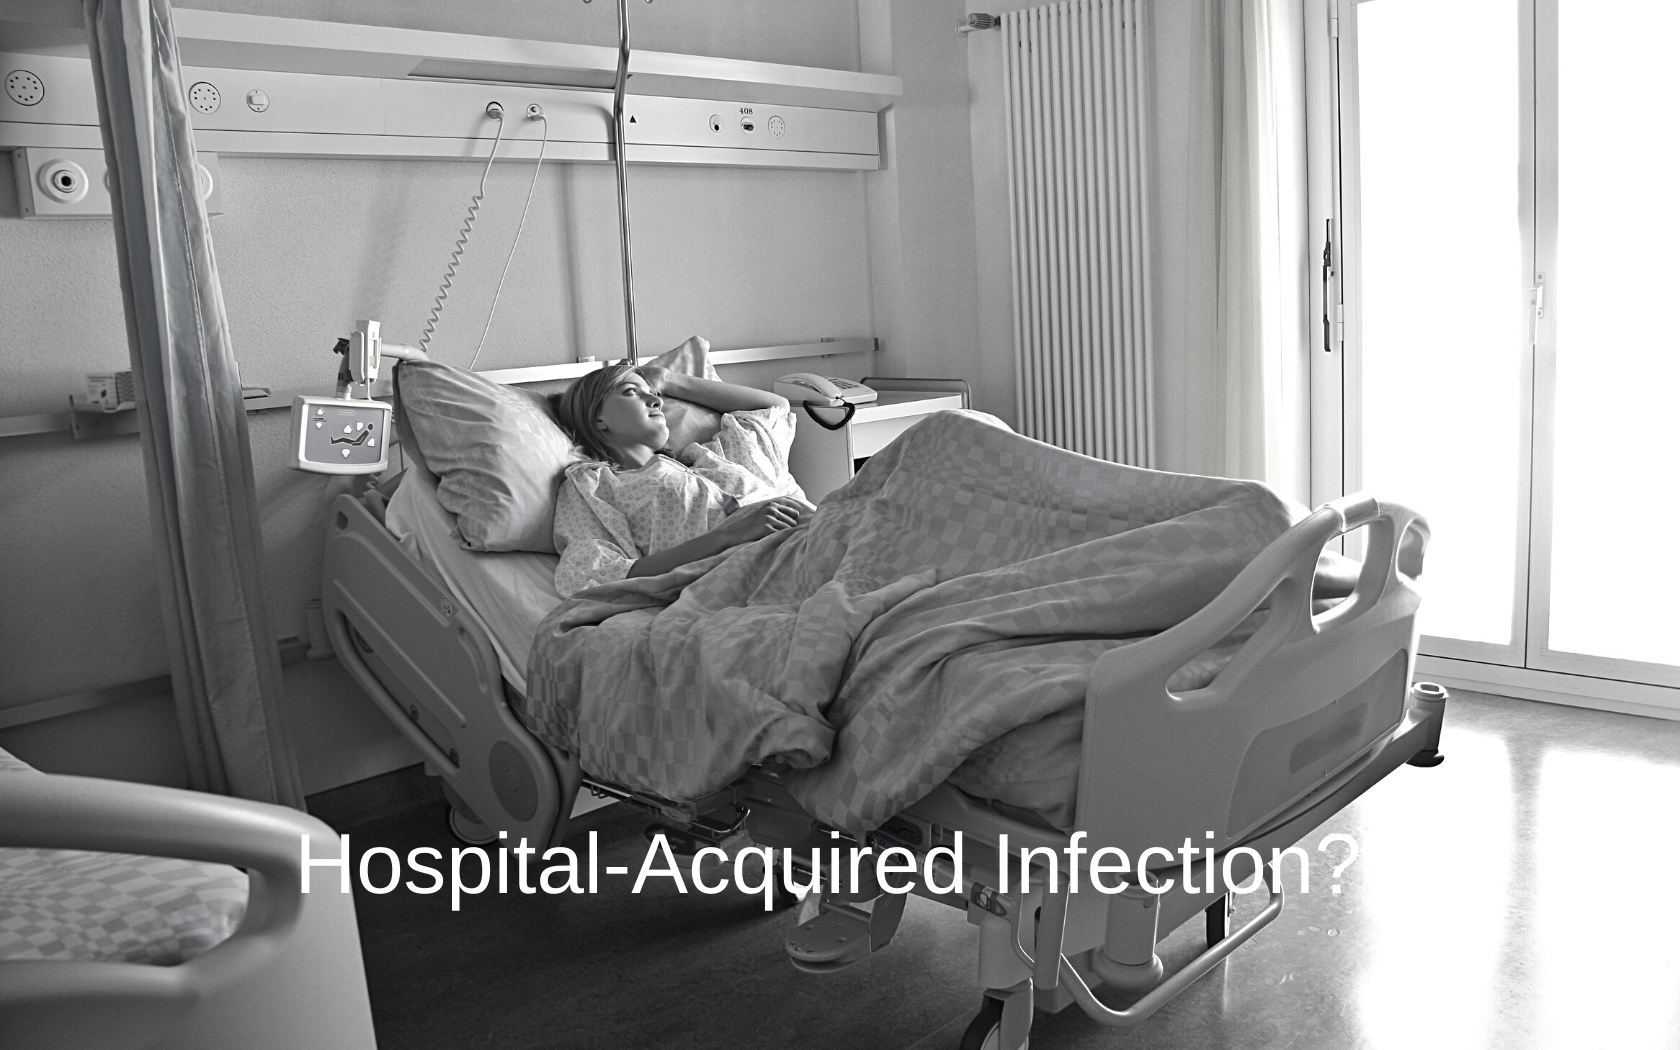 Woman in hospital with sepsis infection.